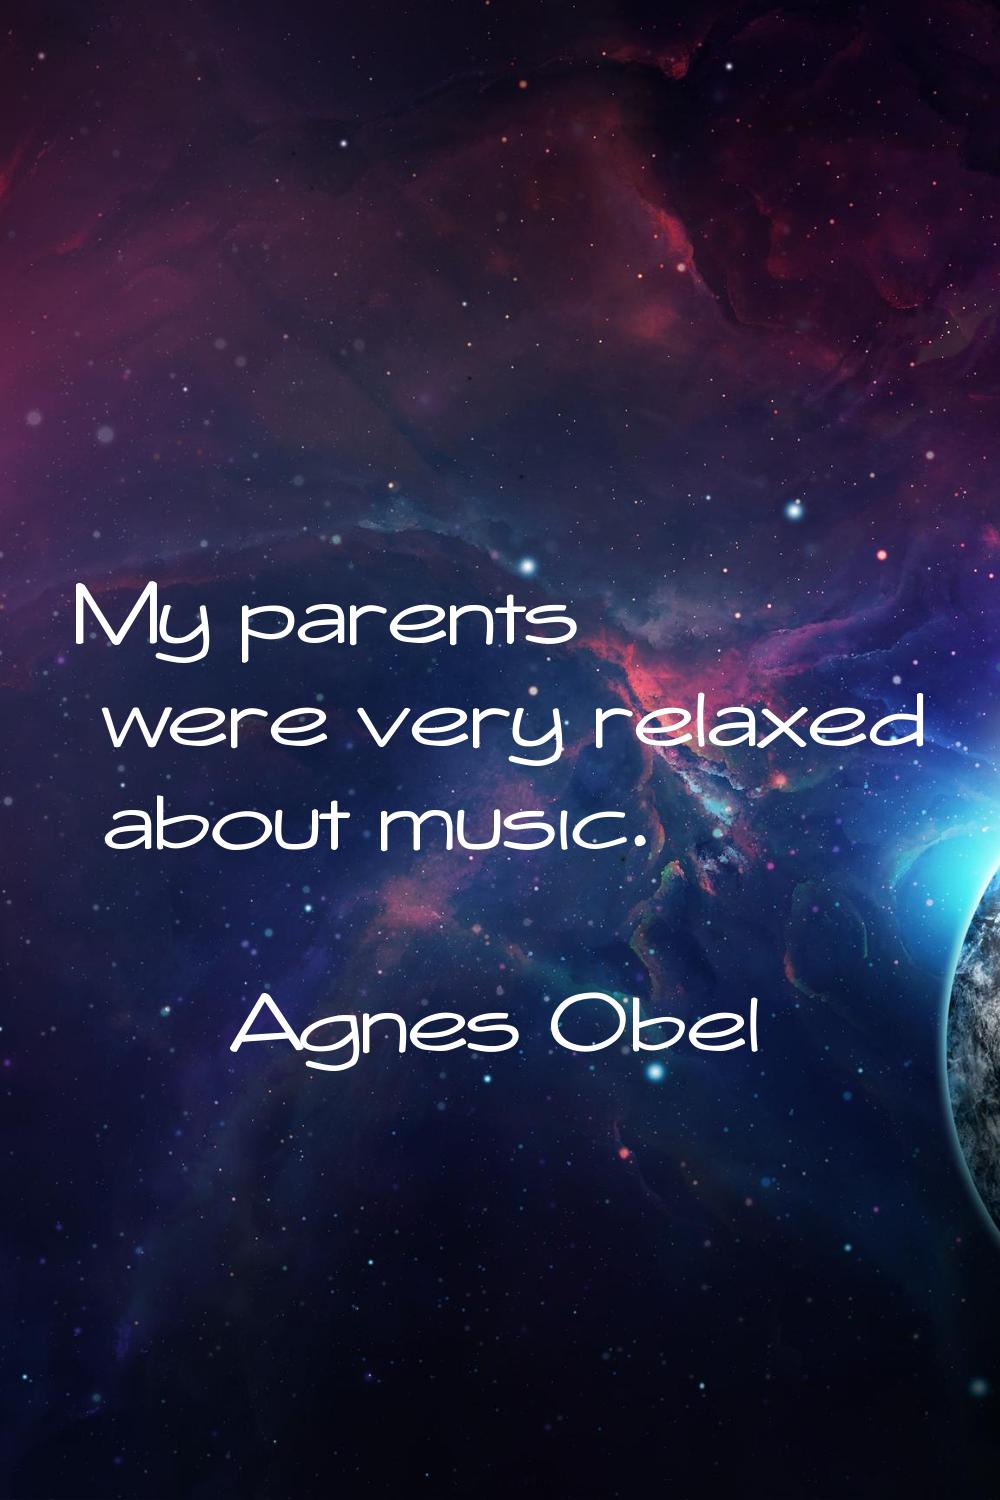 My parents were very relaxed about music.